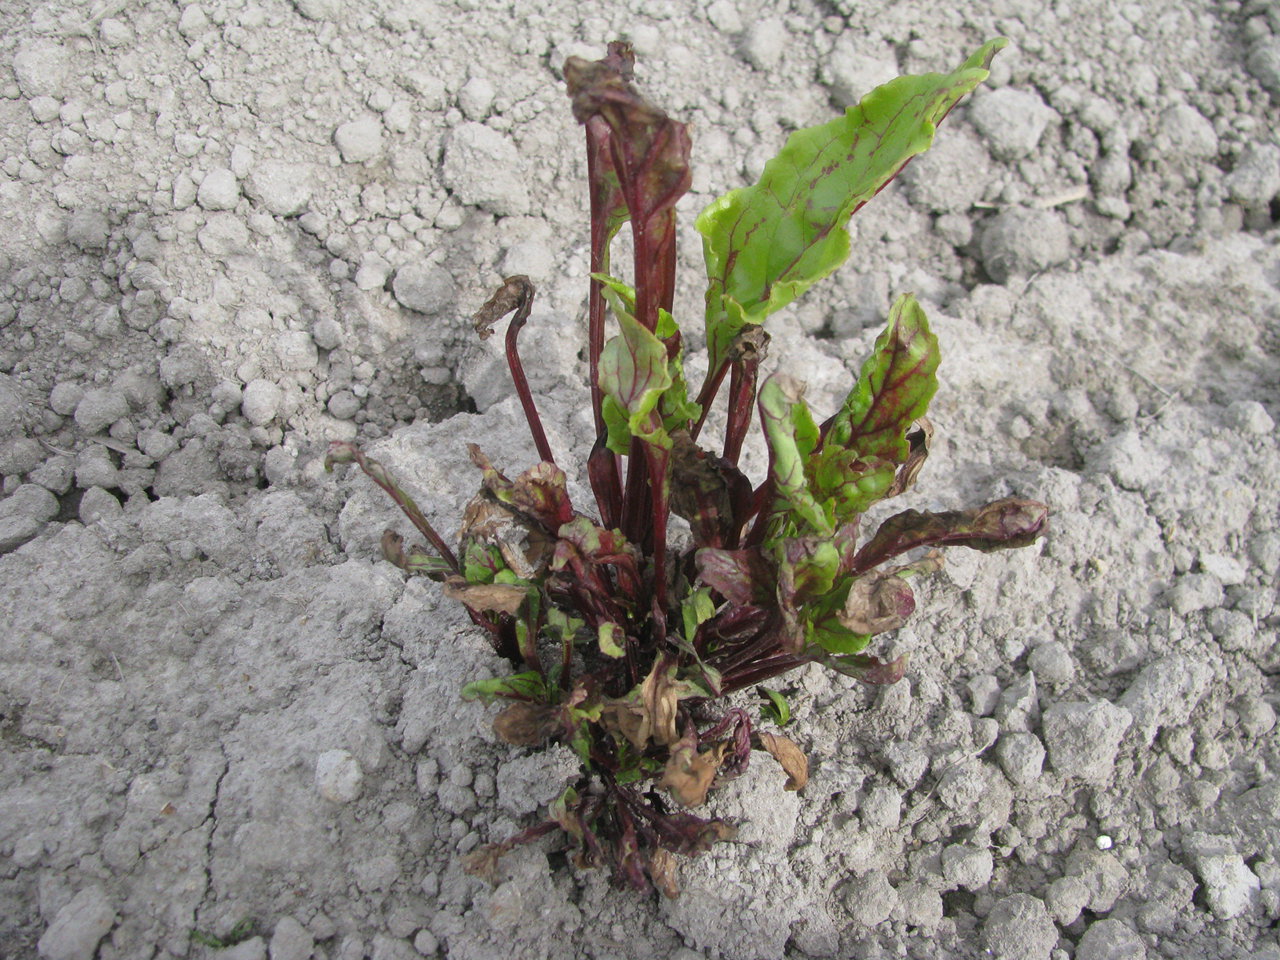 Damage to the new growth of plants in an open-pollinated table beet seed crop observed in May 2016 following application of a high rate of the herbicide Nortron (active ingredient ethofumesate).